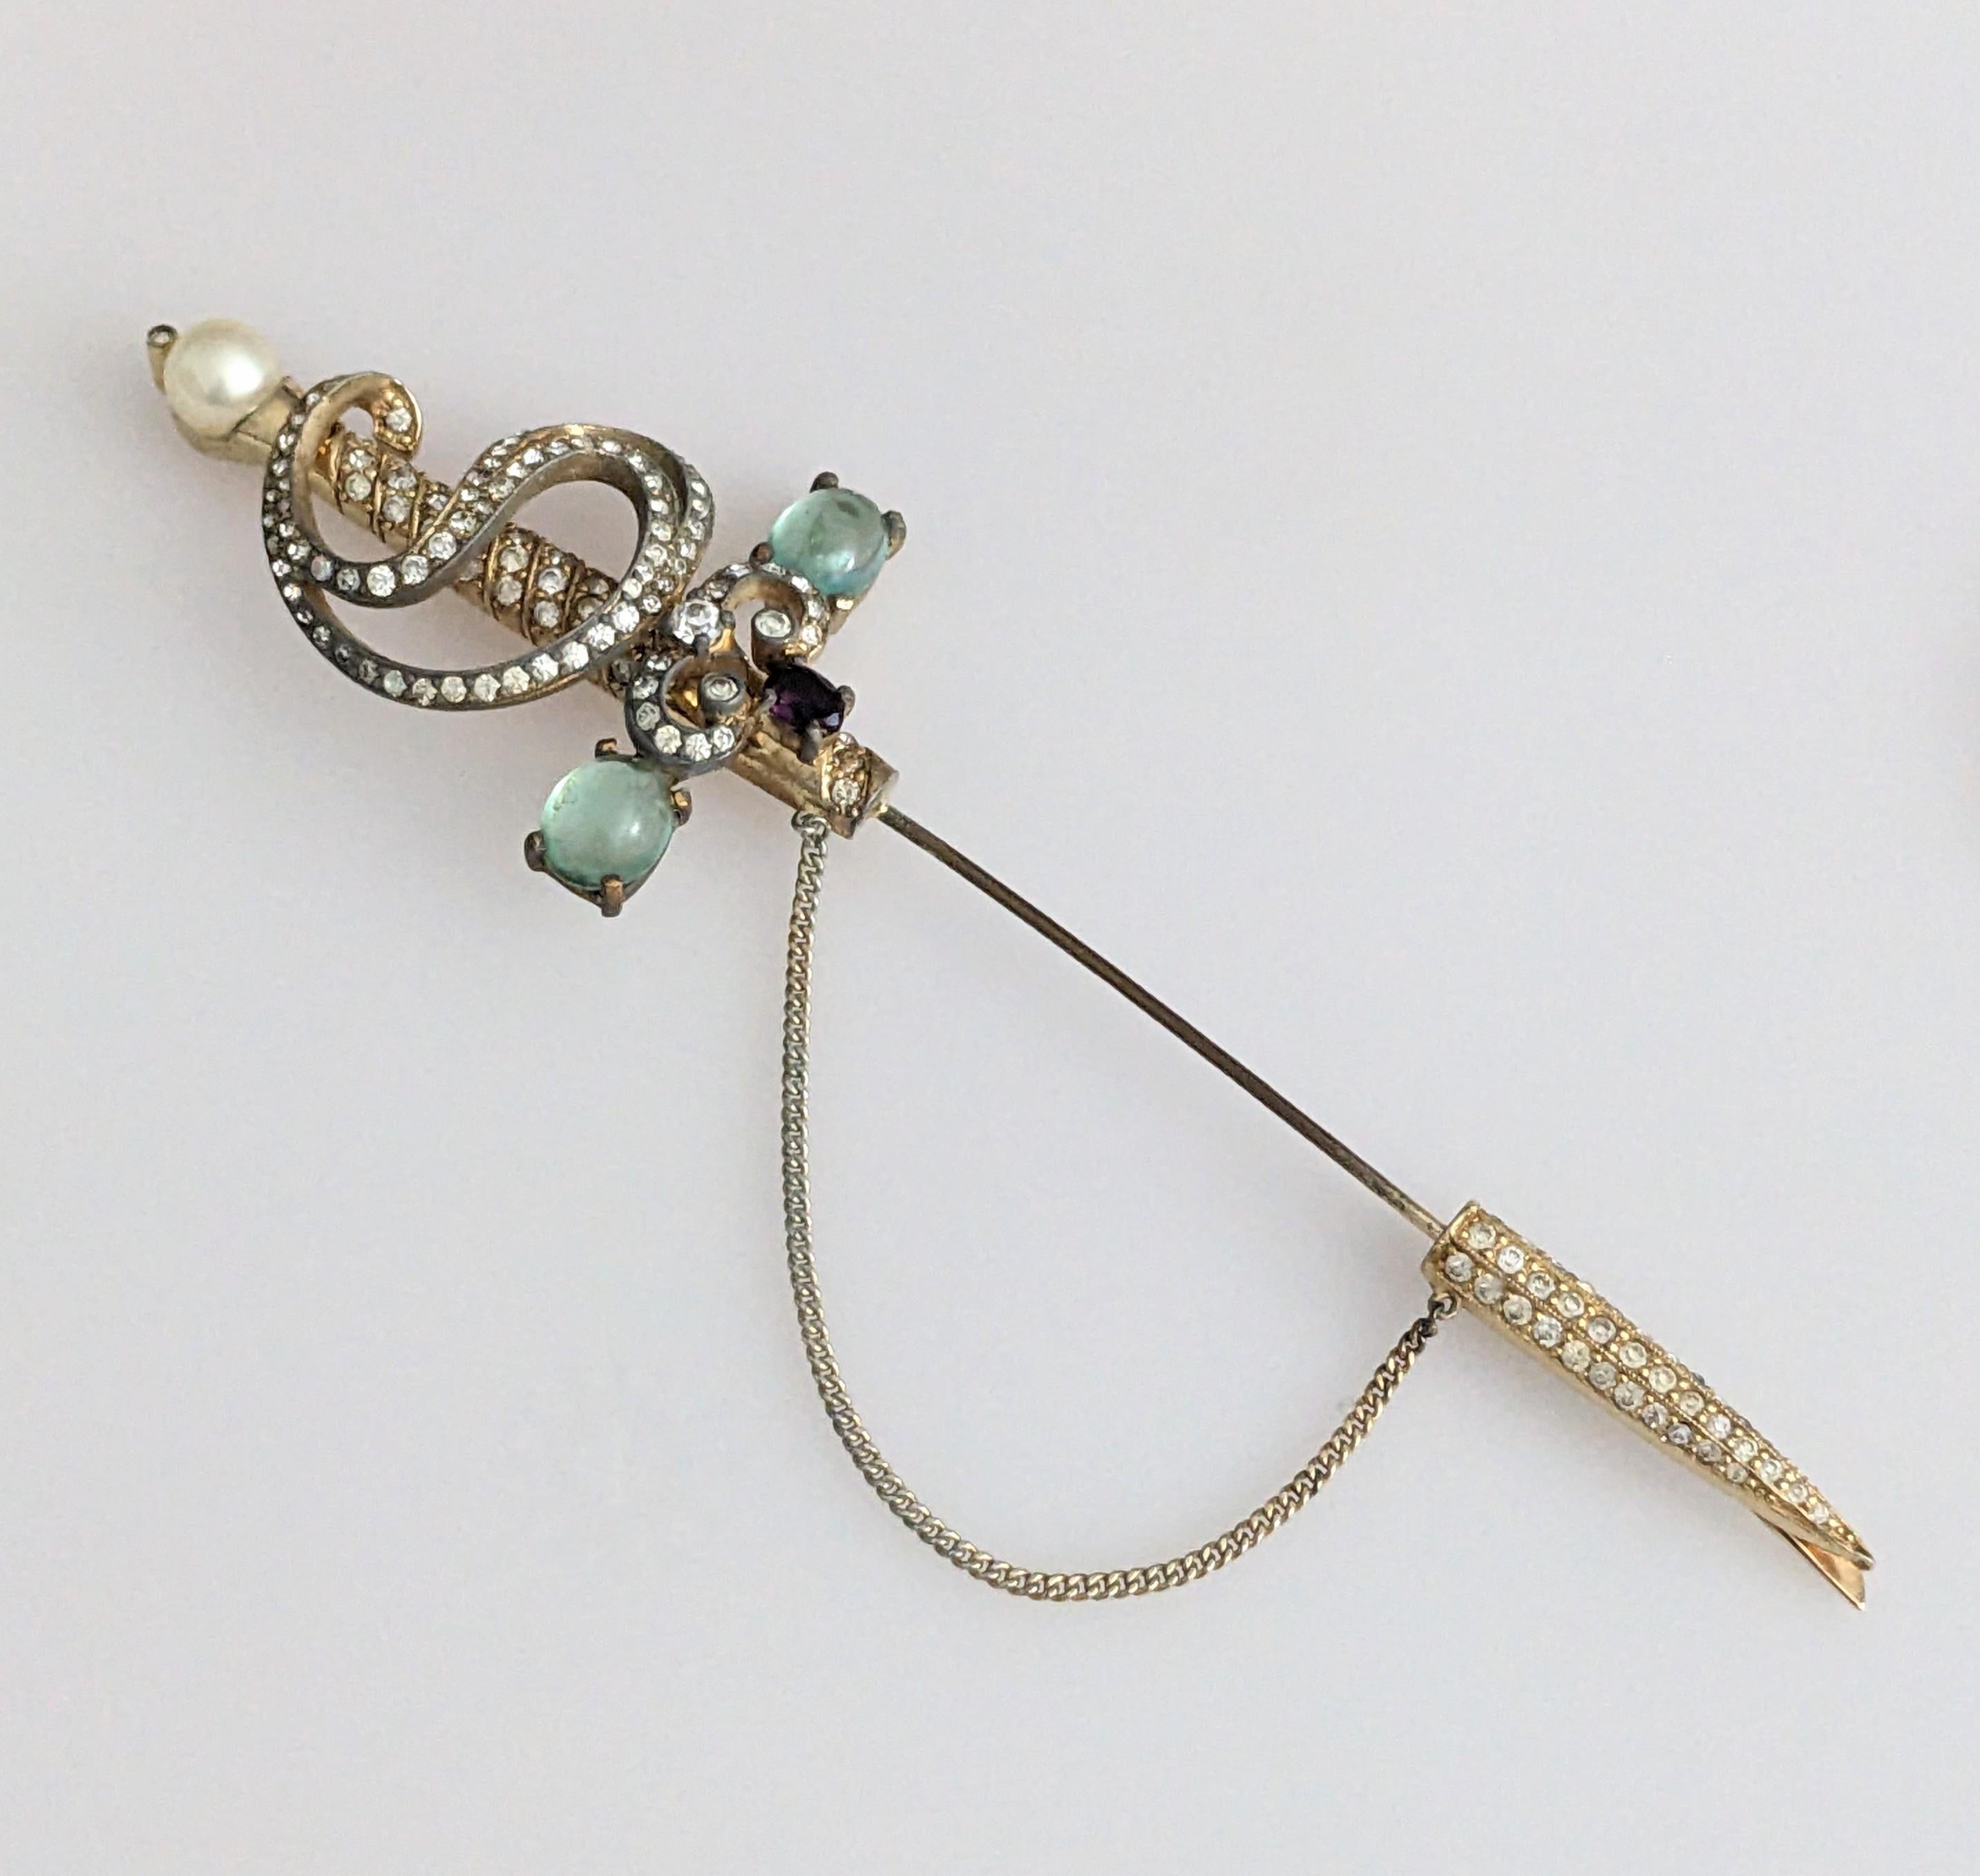 Large Jomaz jabot pin set with pastes, pearls with faux amythest and emeralds from the 1950s. Large sword motif on gilt metal, great on coat or jacket. Excellent condition, 5.75